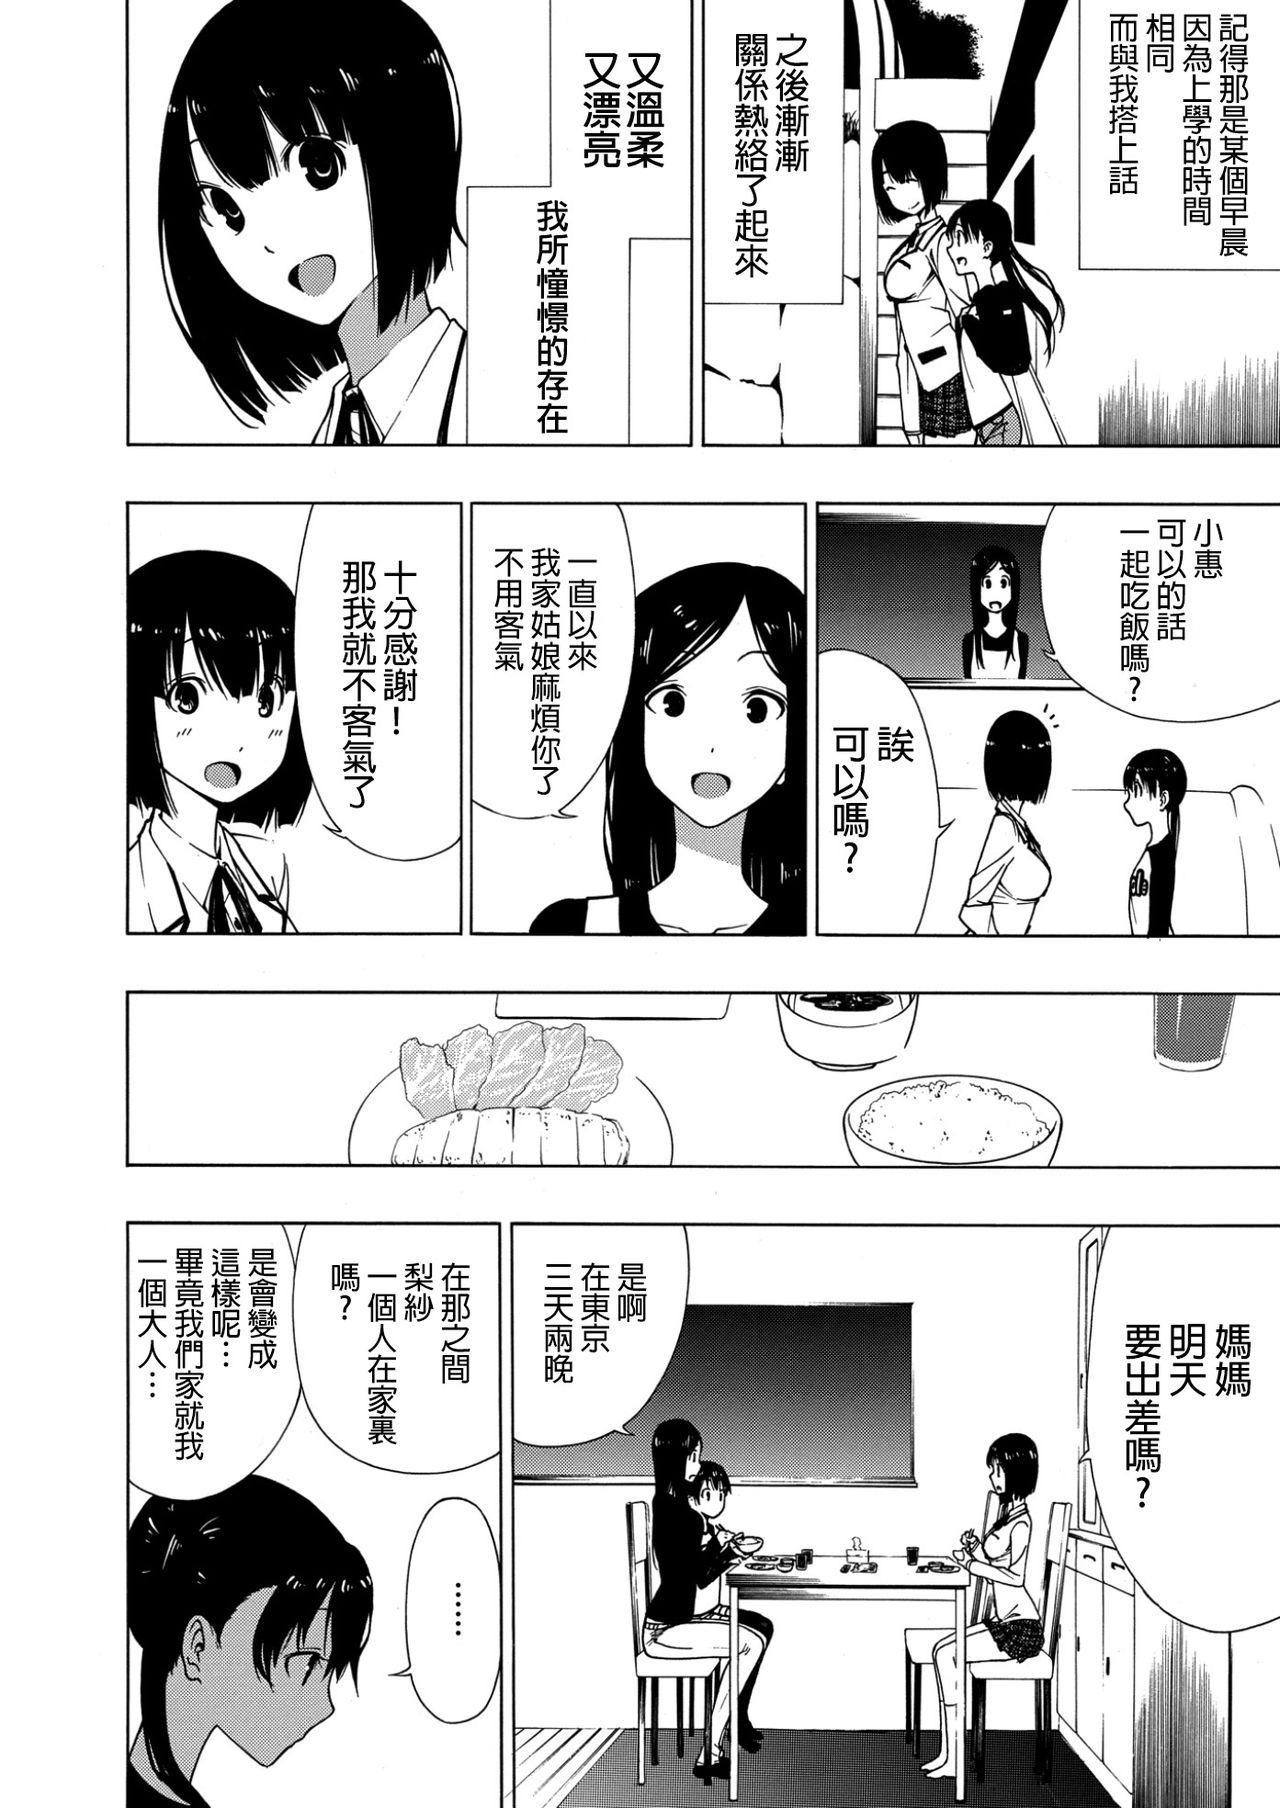 Pigtails Akogare no Onee-san | 憧憬的姐姐 Shecock - Page 5